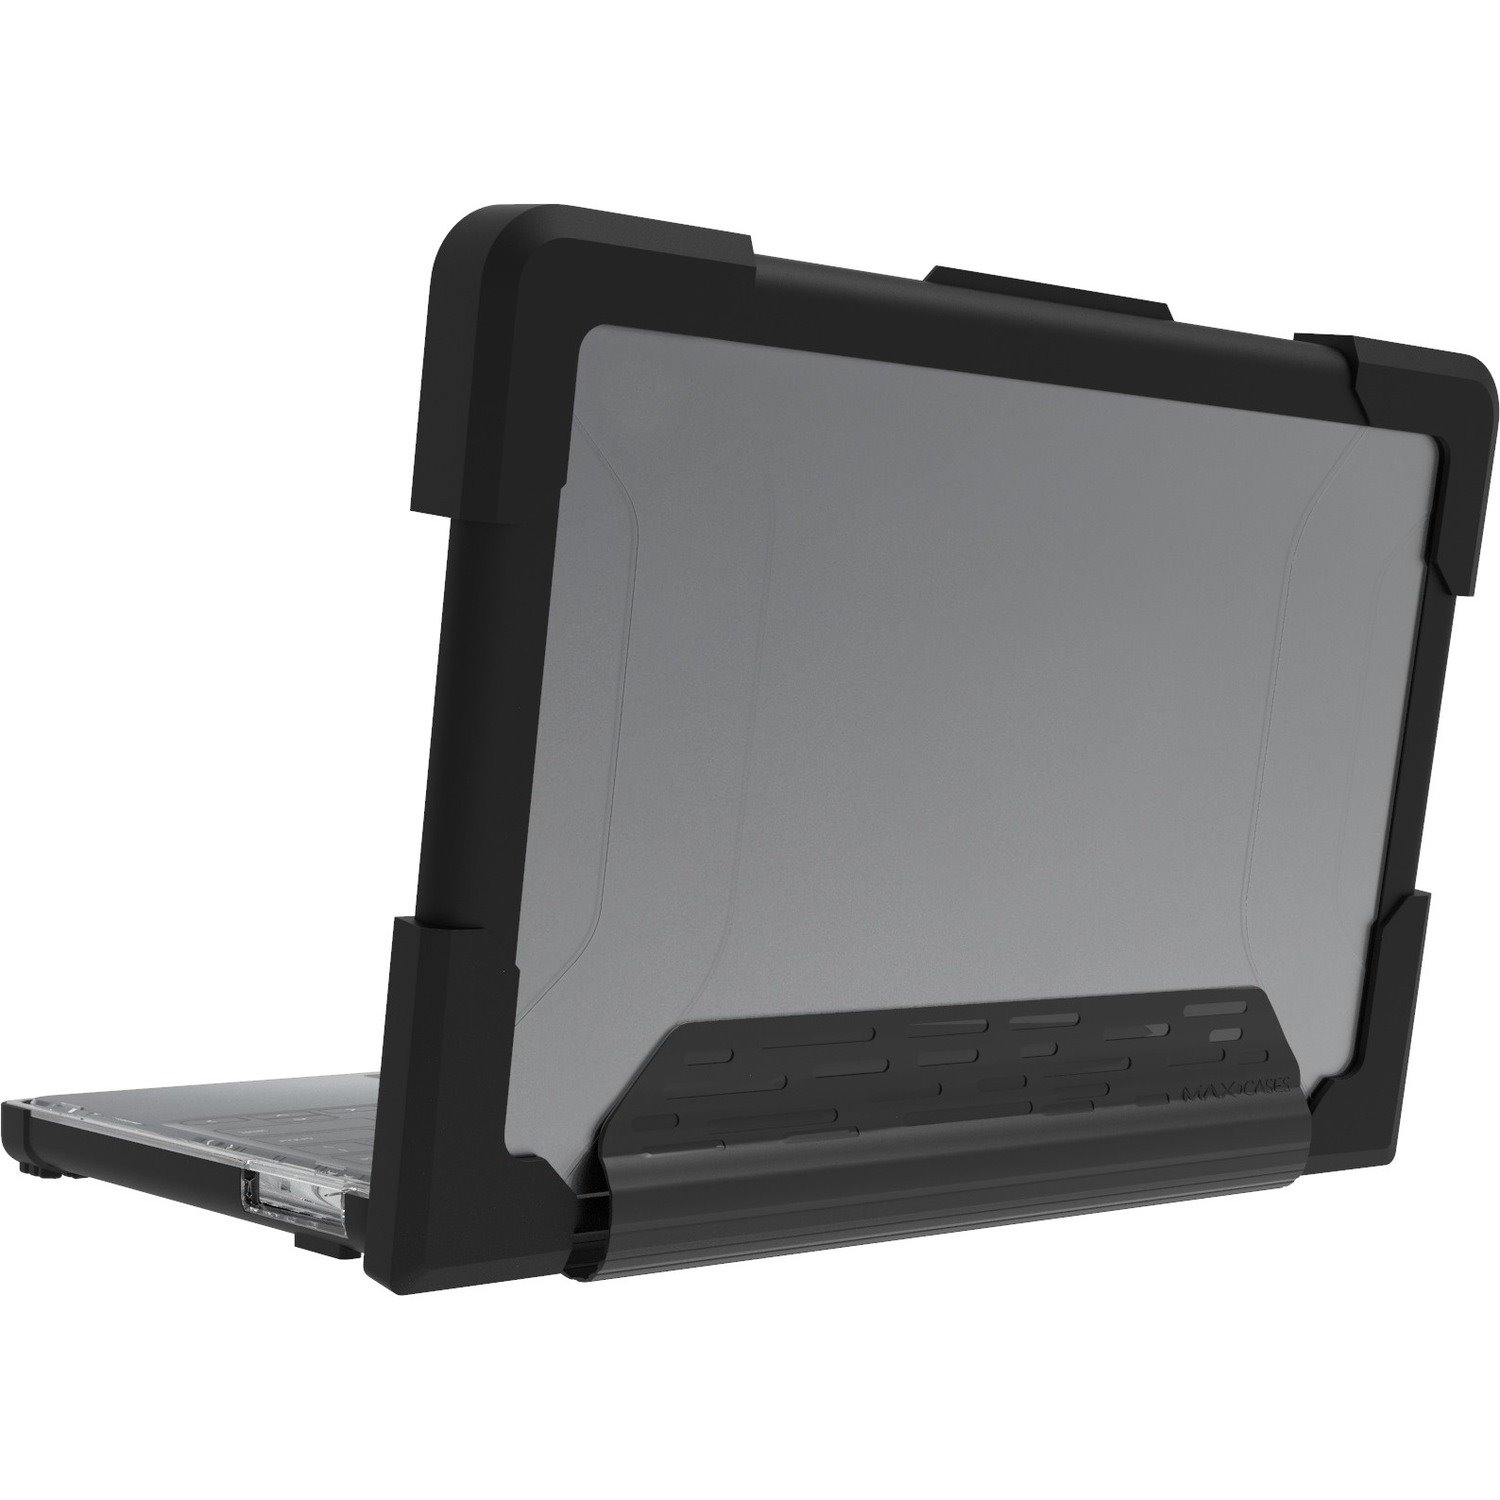 MAXCases Extreme Shell-S for HP G7 EE Chromebook Clamshell 11.6" (Black)